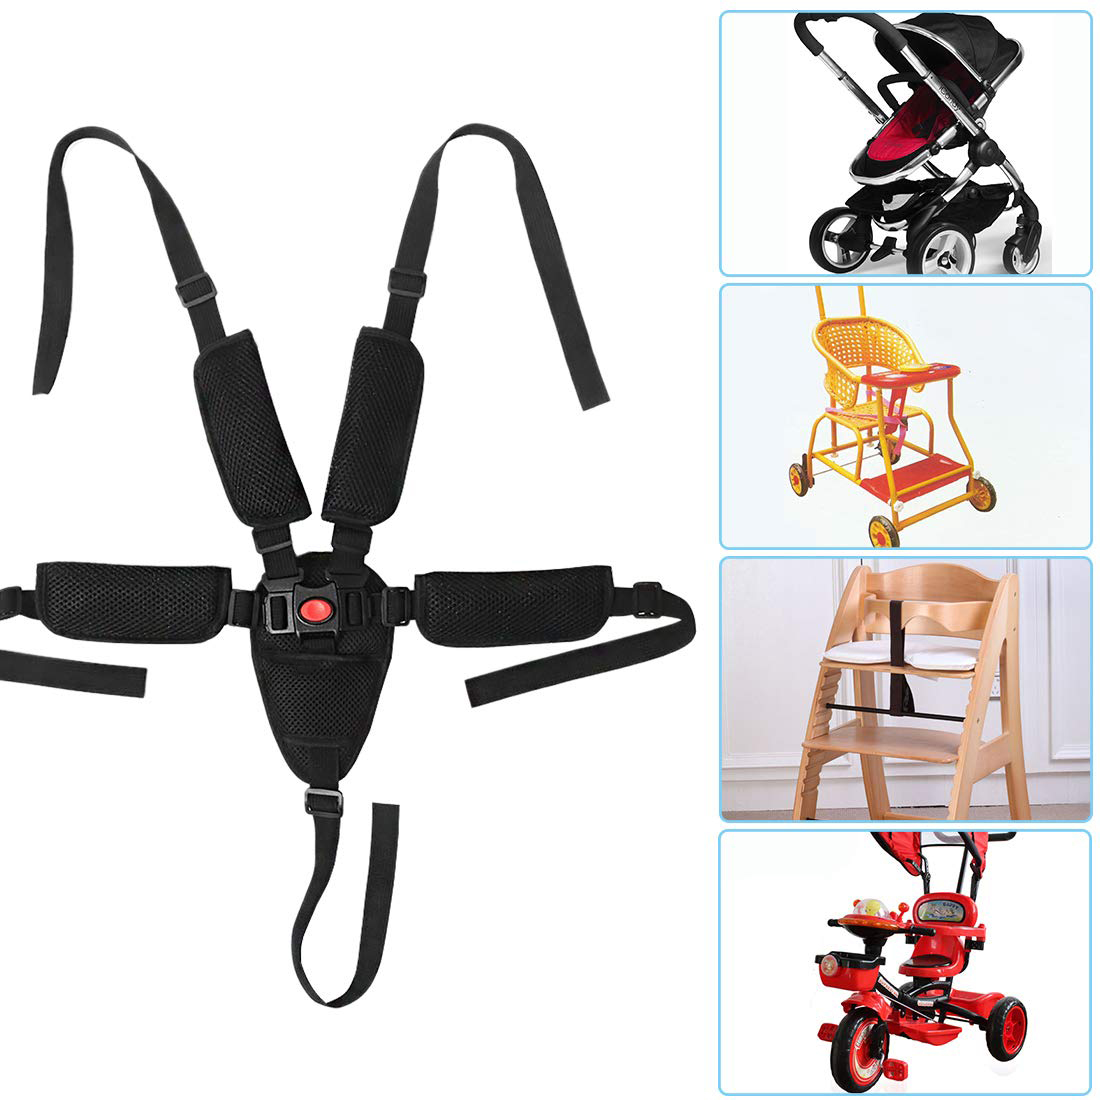 5 Point Harness Harness for High Chair High Chair Straps High Chair Harness,Universal Baby Safe Belt Holder Replacement for Wooden High Chair 